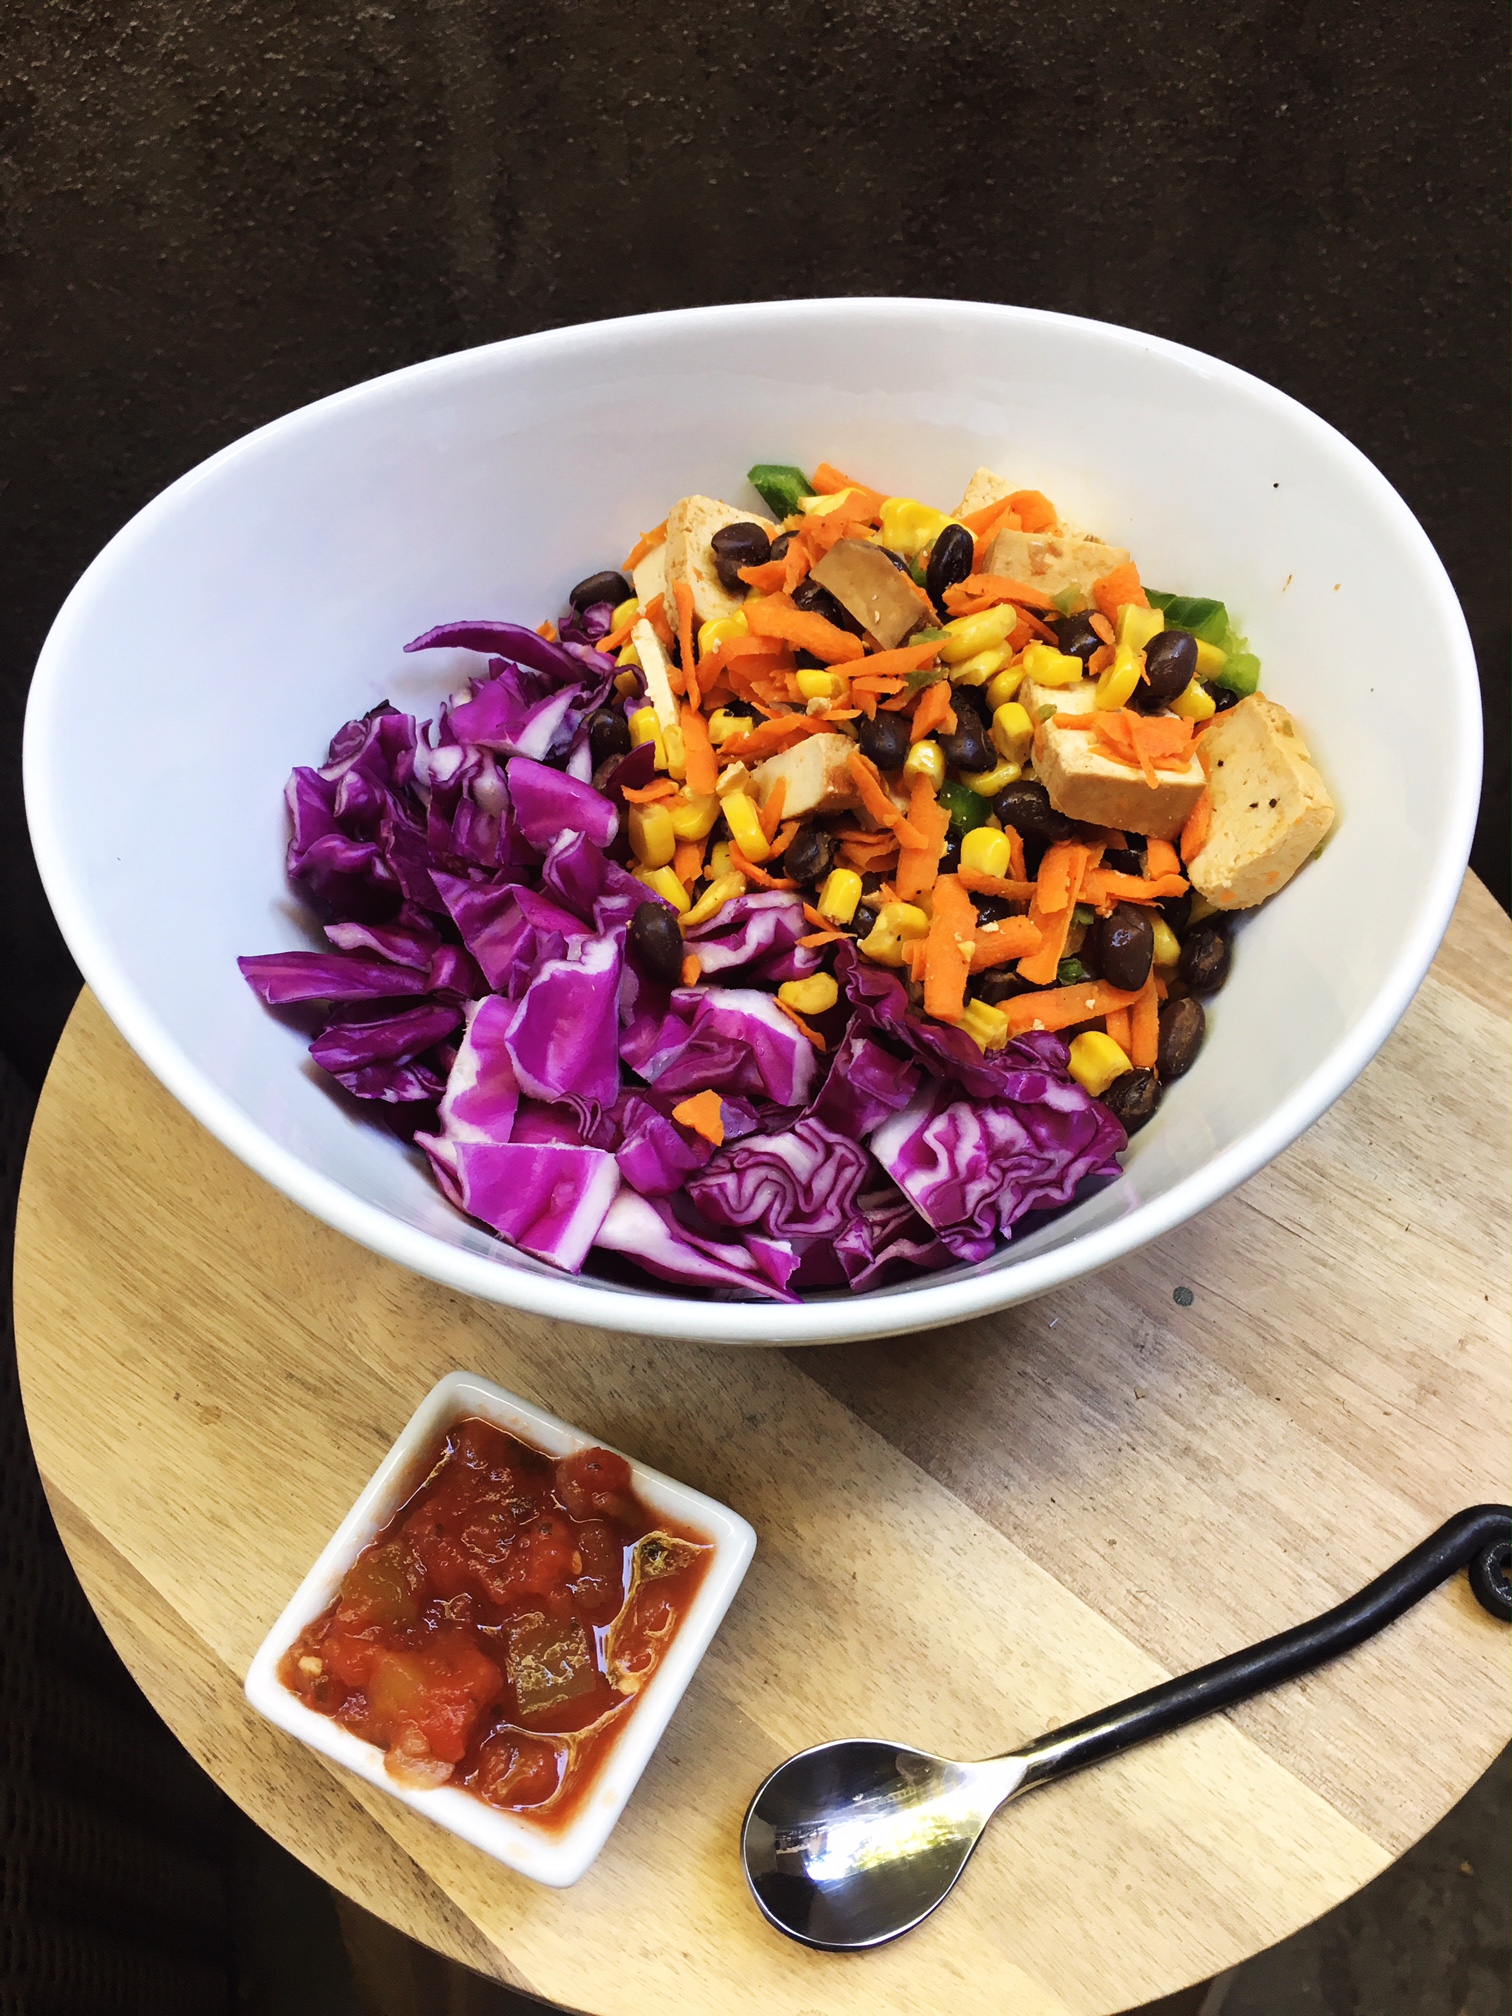 Big colorful bowl of veggies with a side of salsa